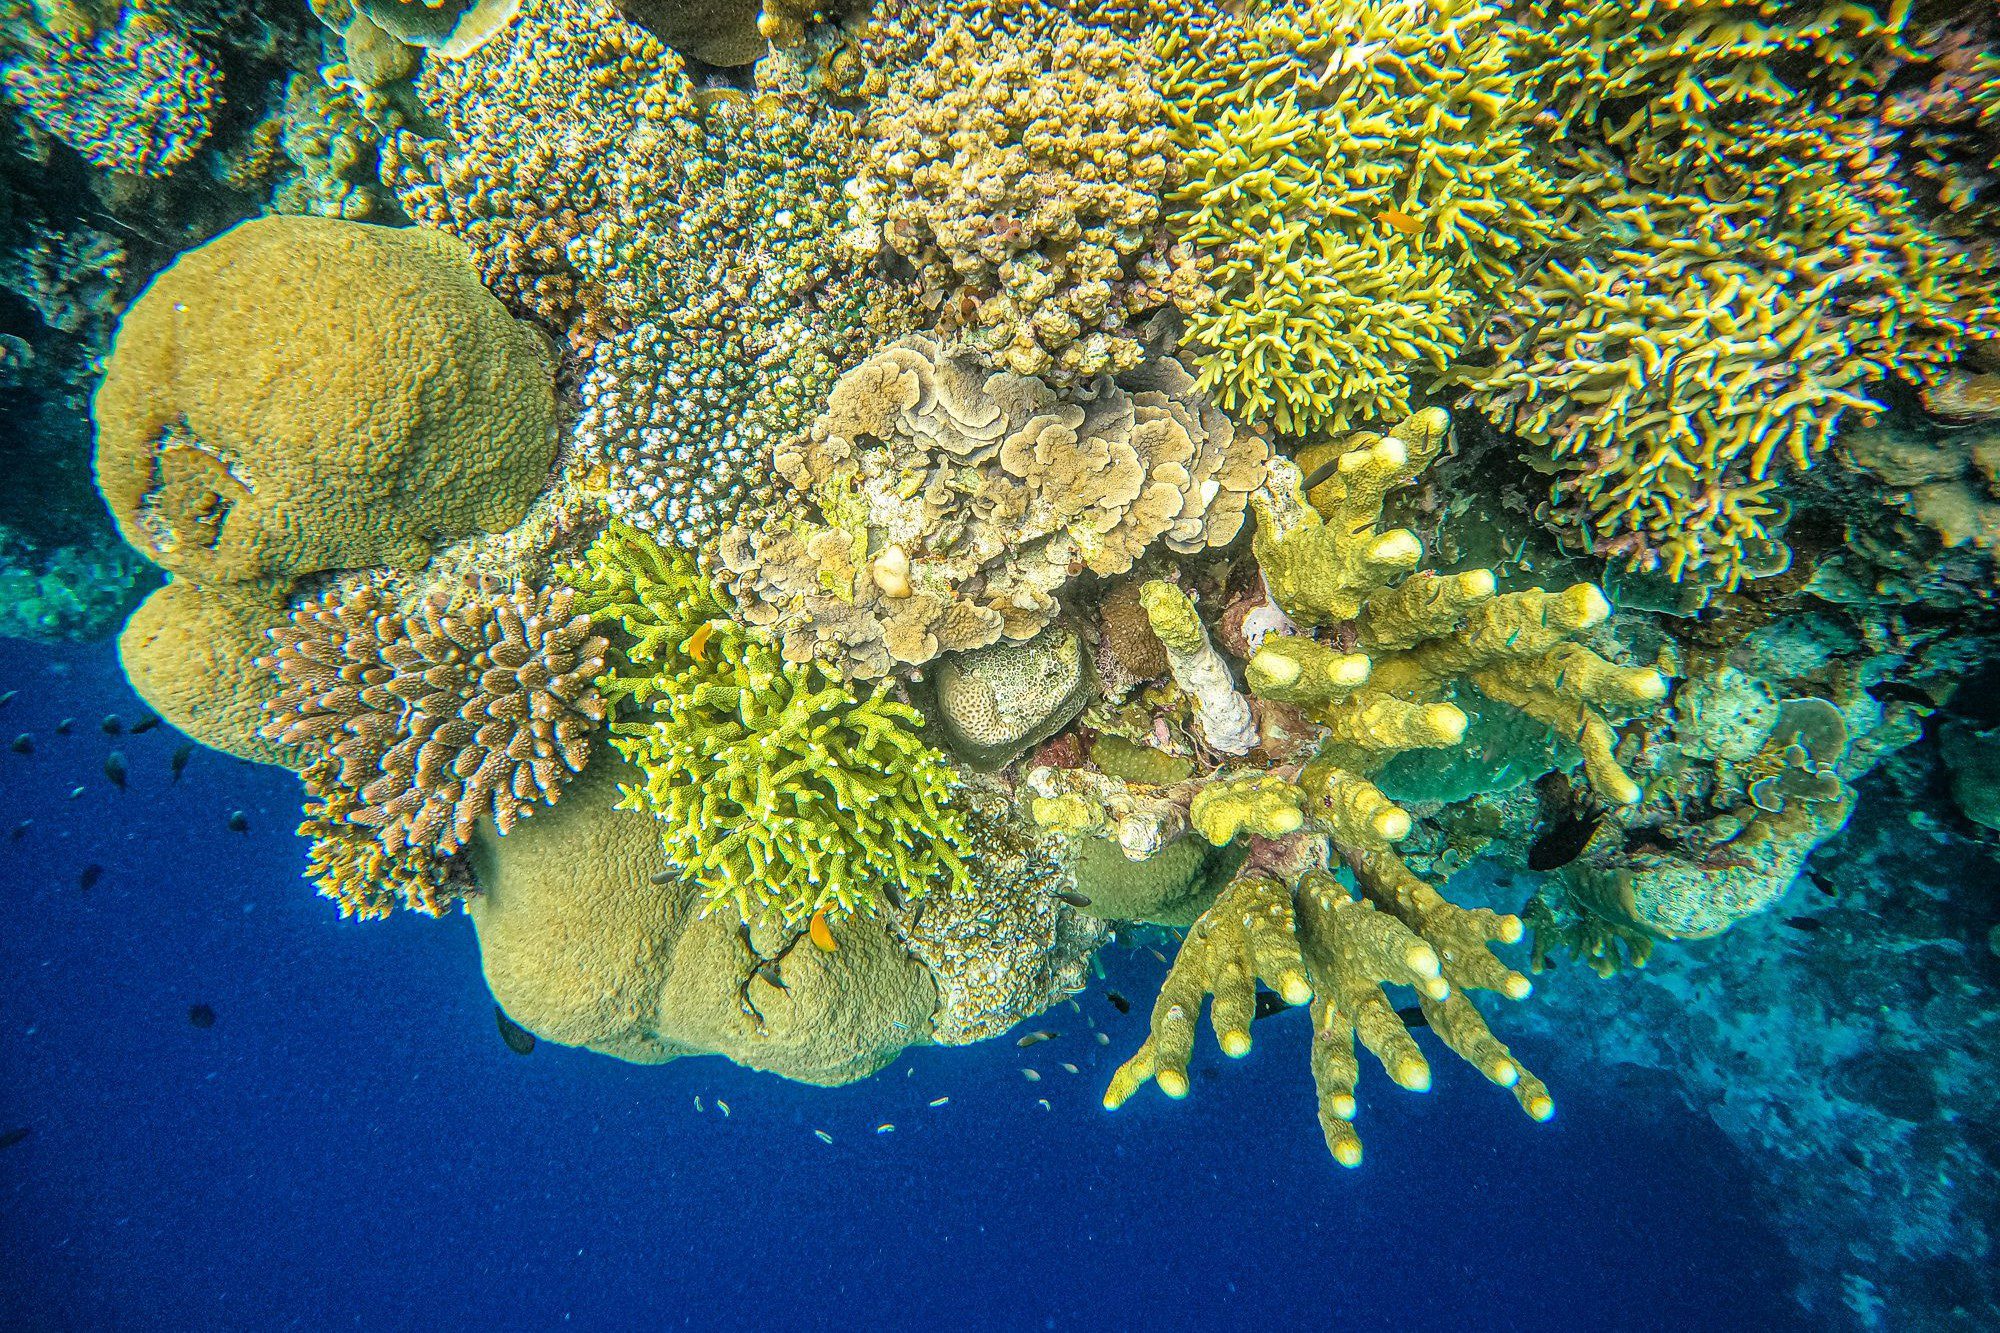 A cluster of hard and soft coral reefs